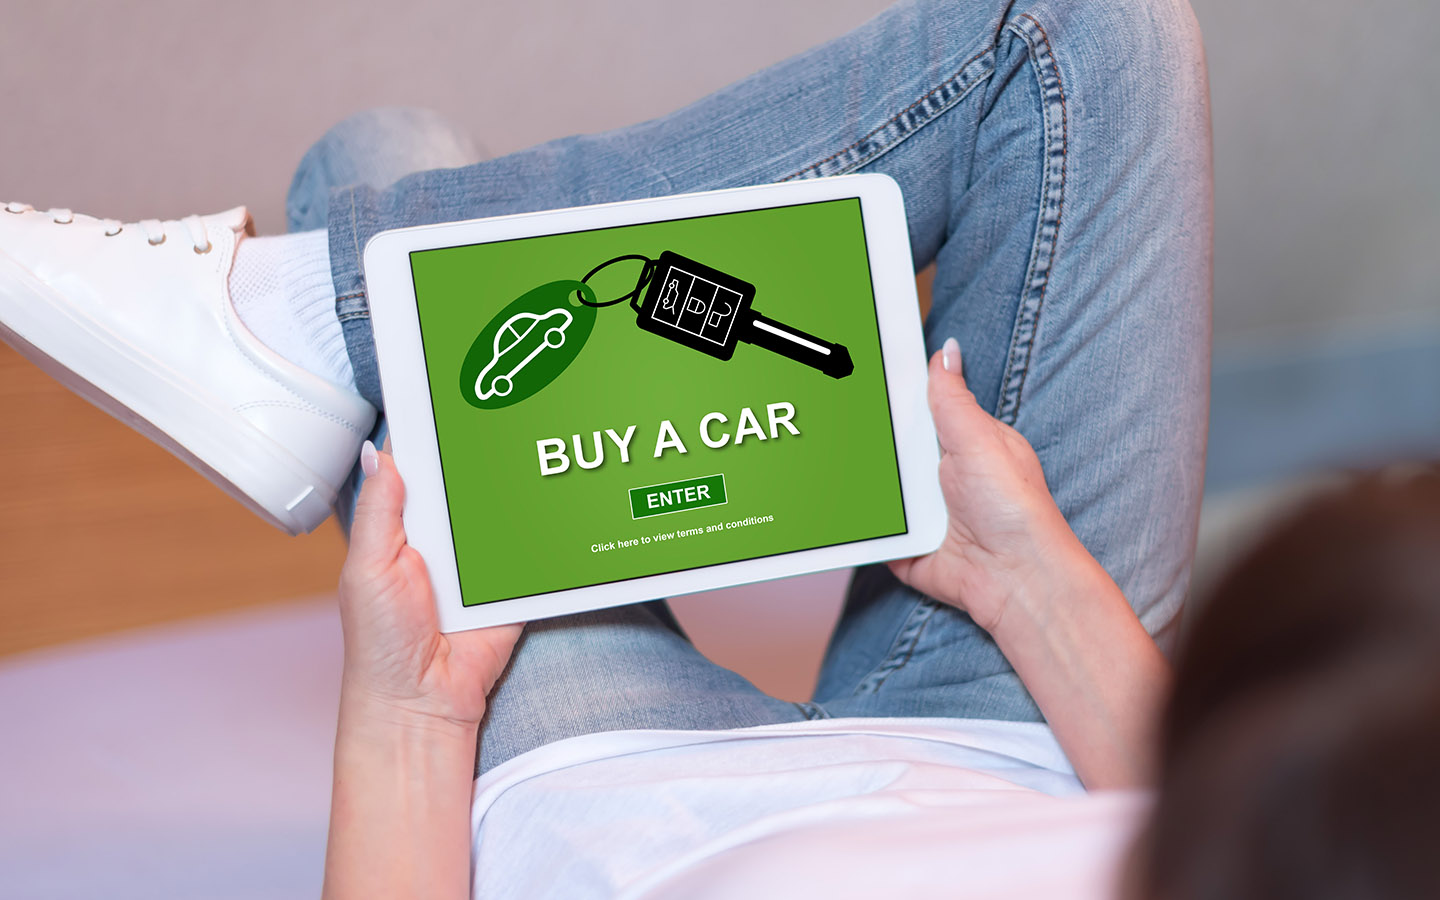 Process on how to buy a car online